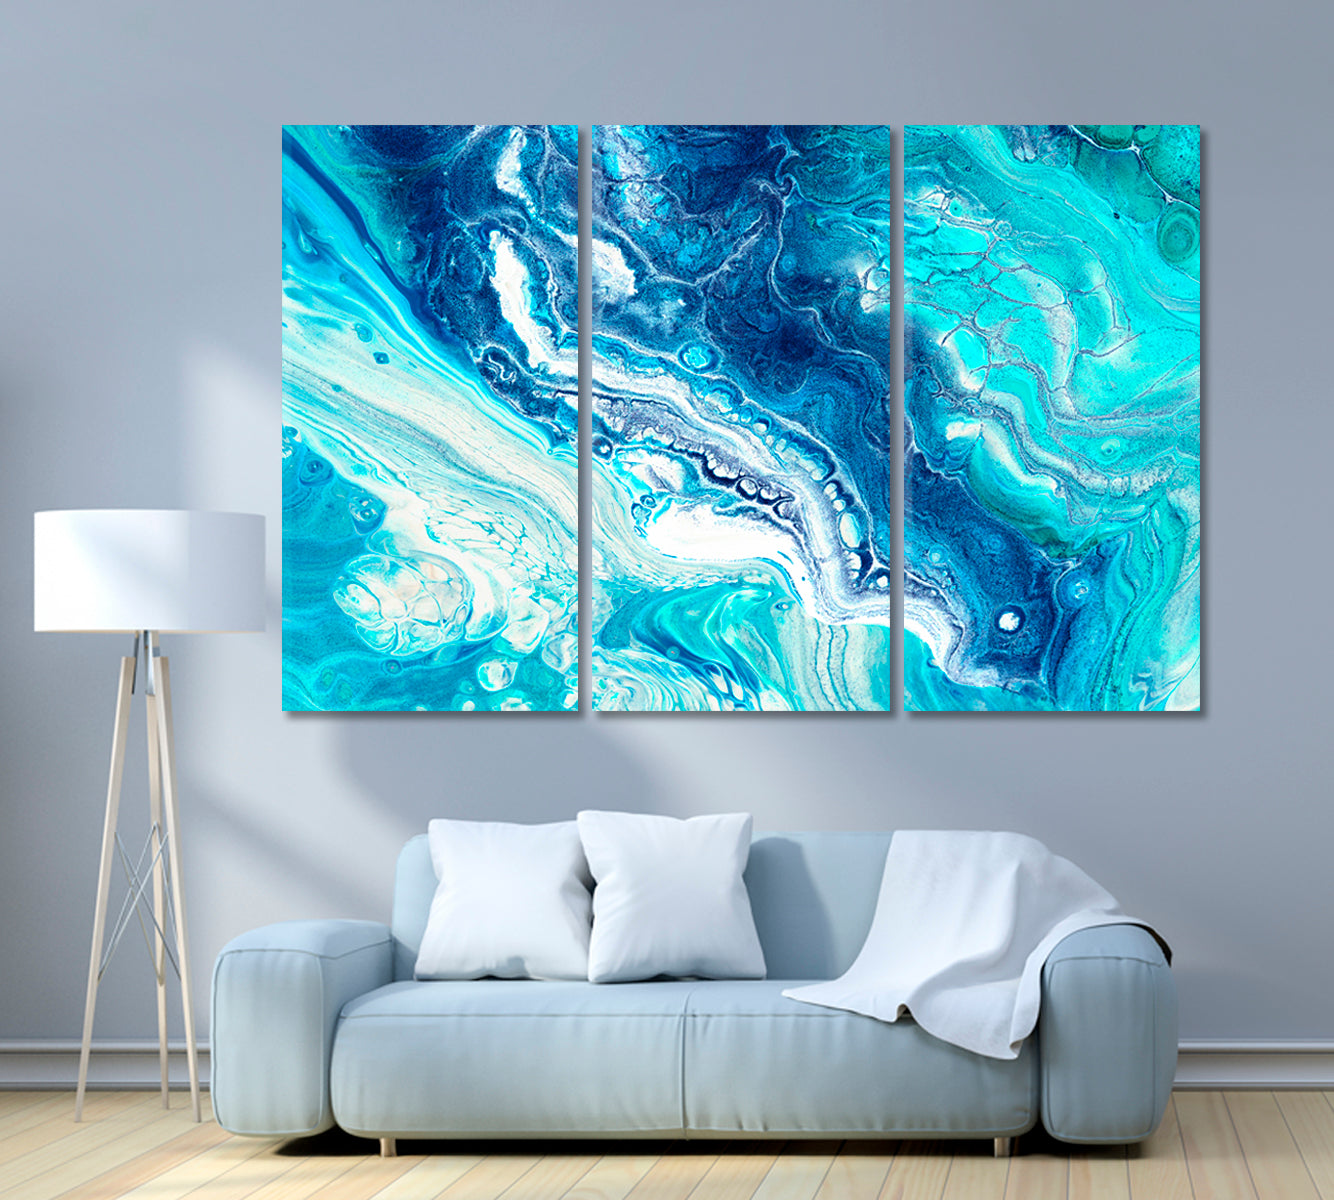 Creative Abstract Bubbles with Blue Swirls Canvas Print-Canvas Print-CetArt-3 Panels-36x24 inches-CetArt